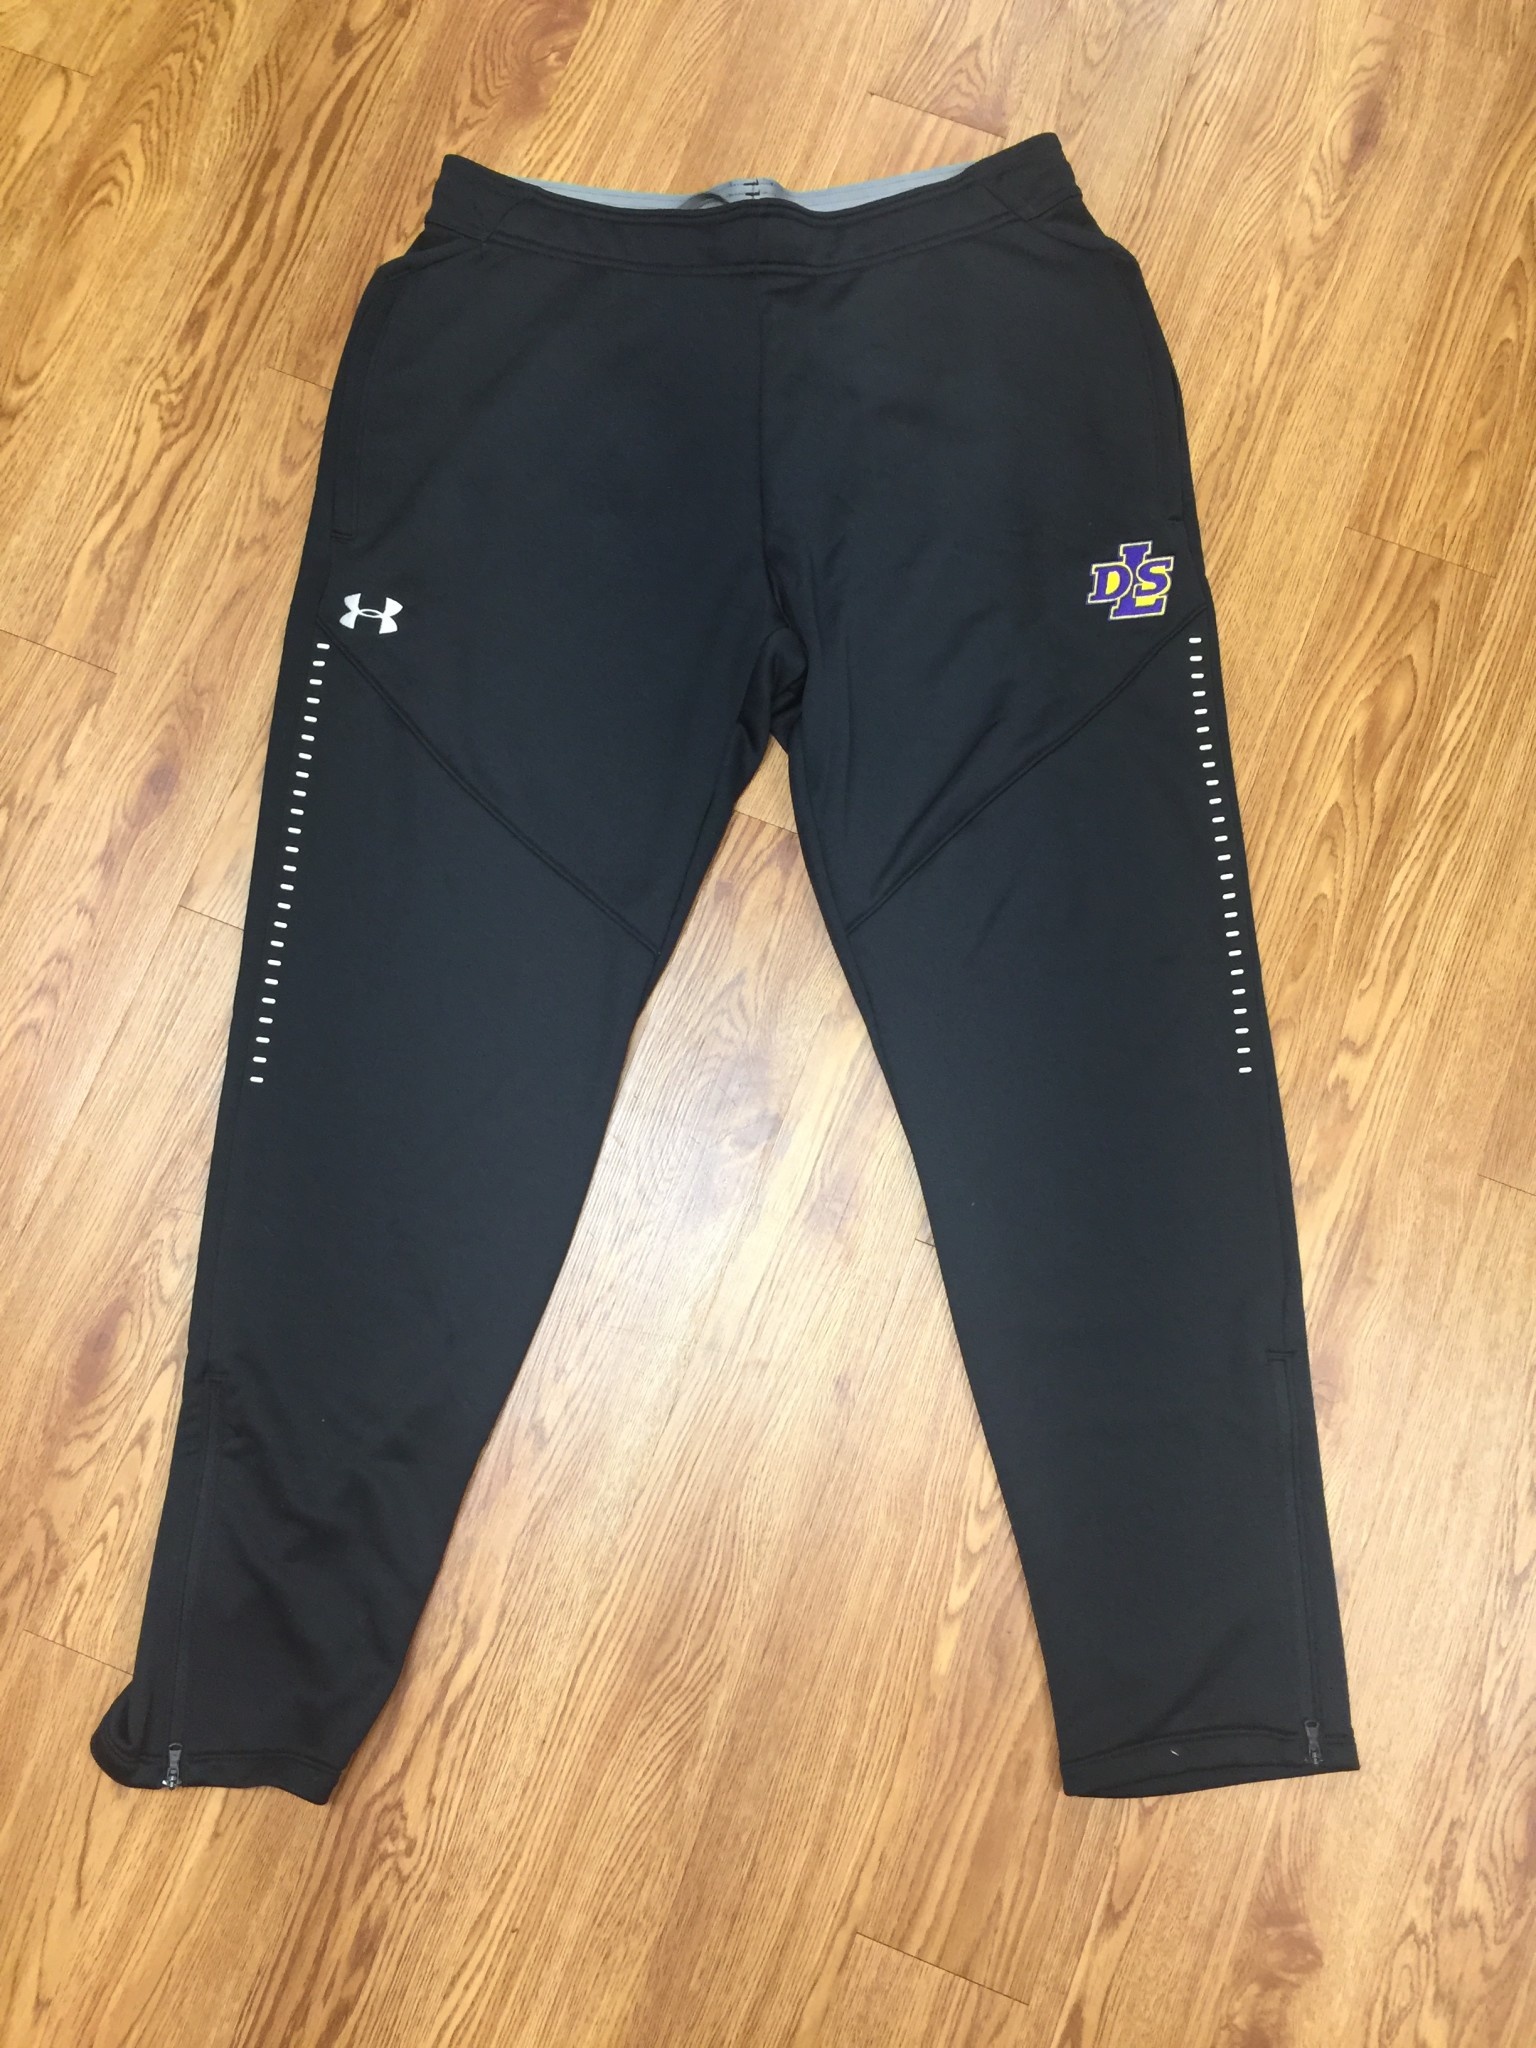 under armour cold gear loose sweatpants